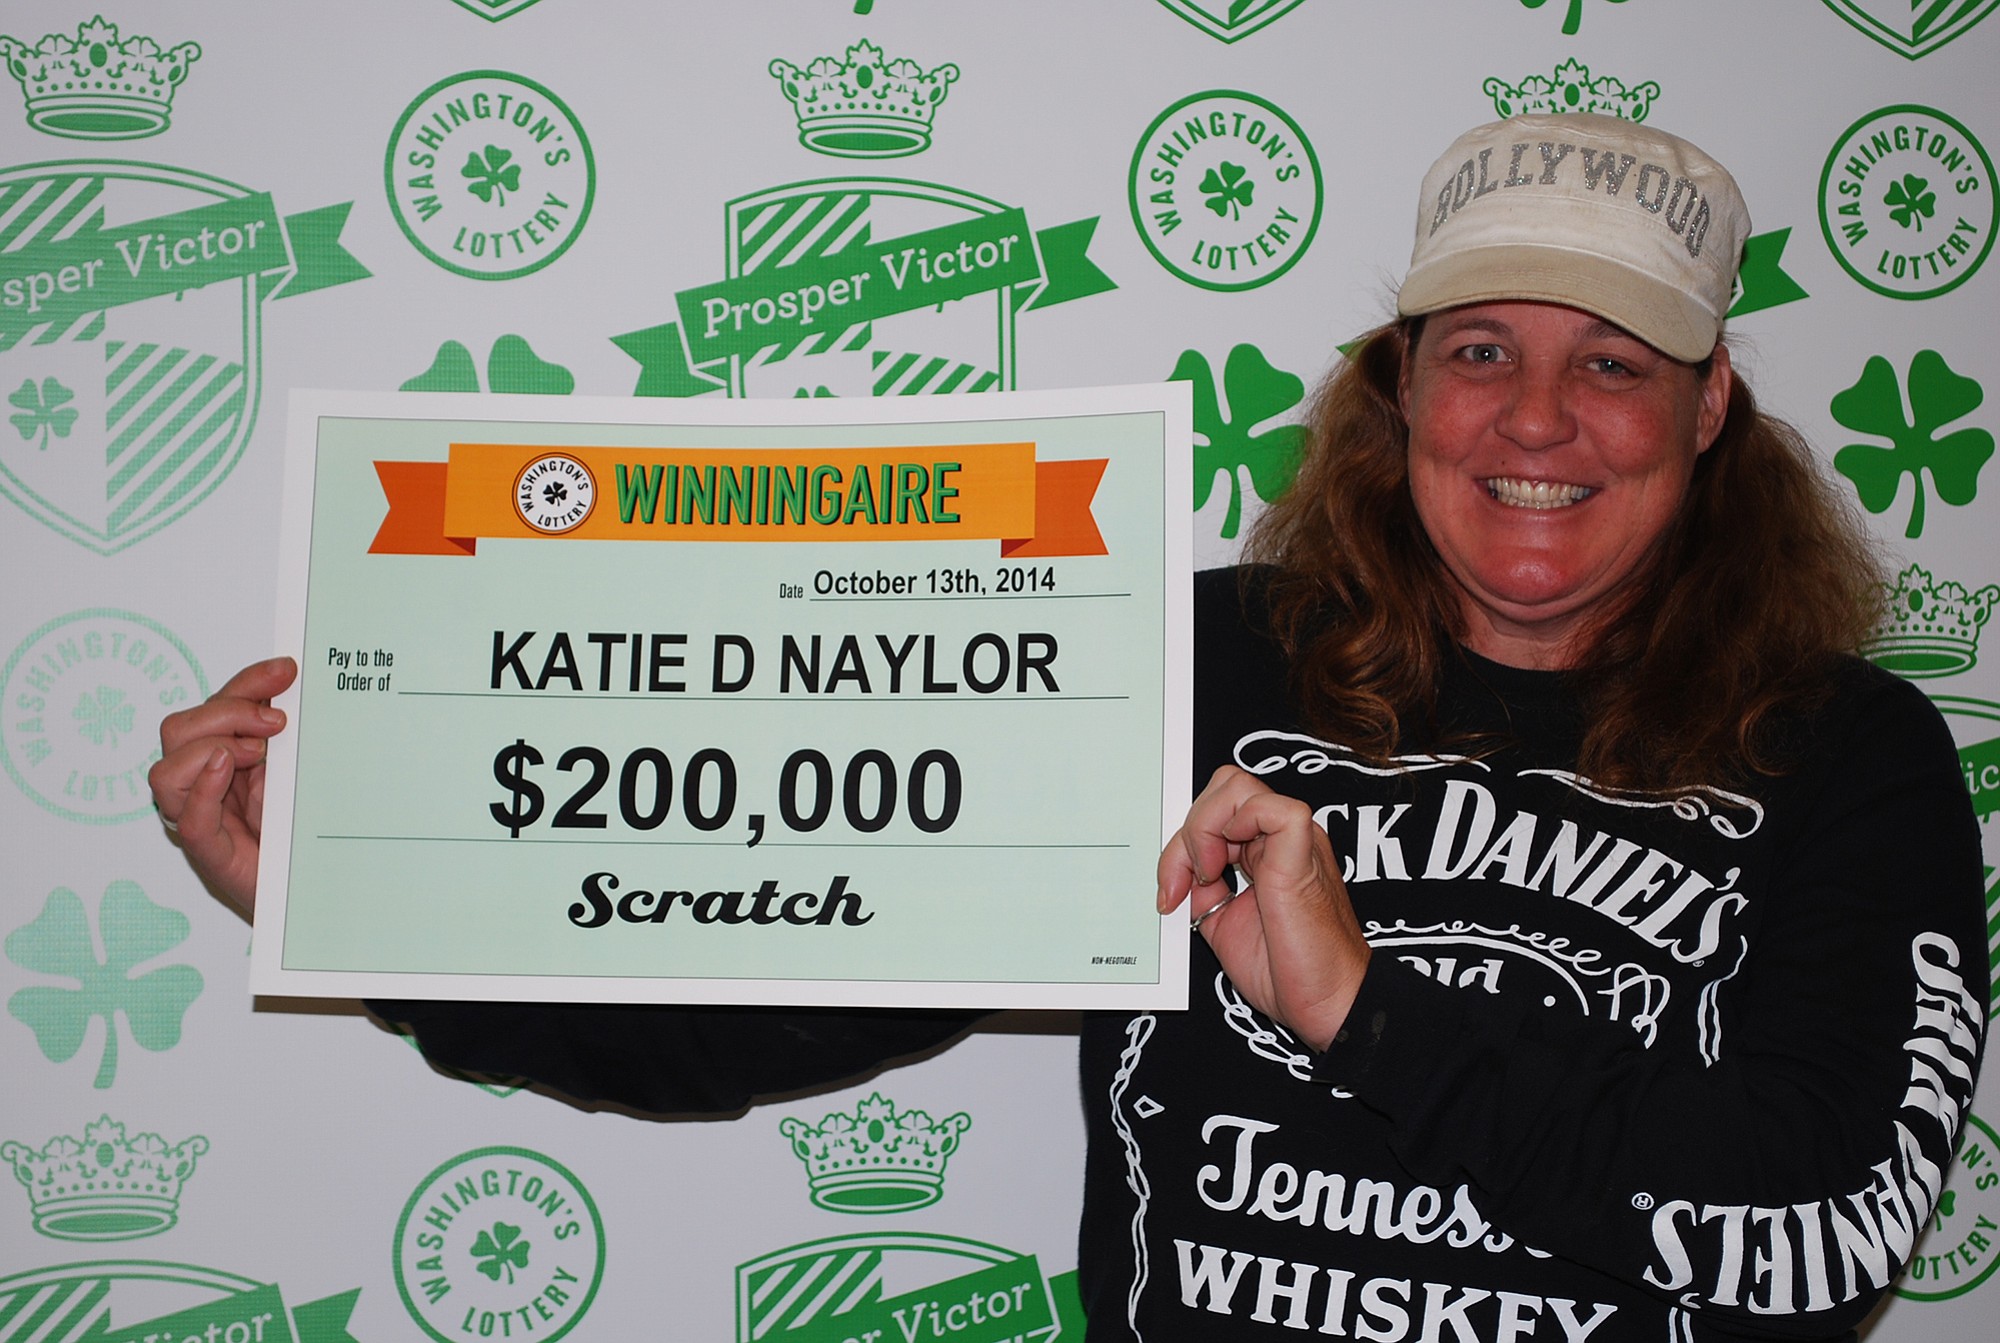 North Image: Katie Naylor, from Vancouver, won $200,000 playing a Washington Lottery scratch ticket she bought on Oct.